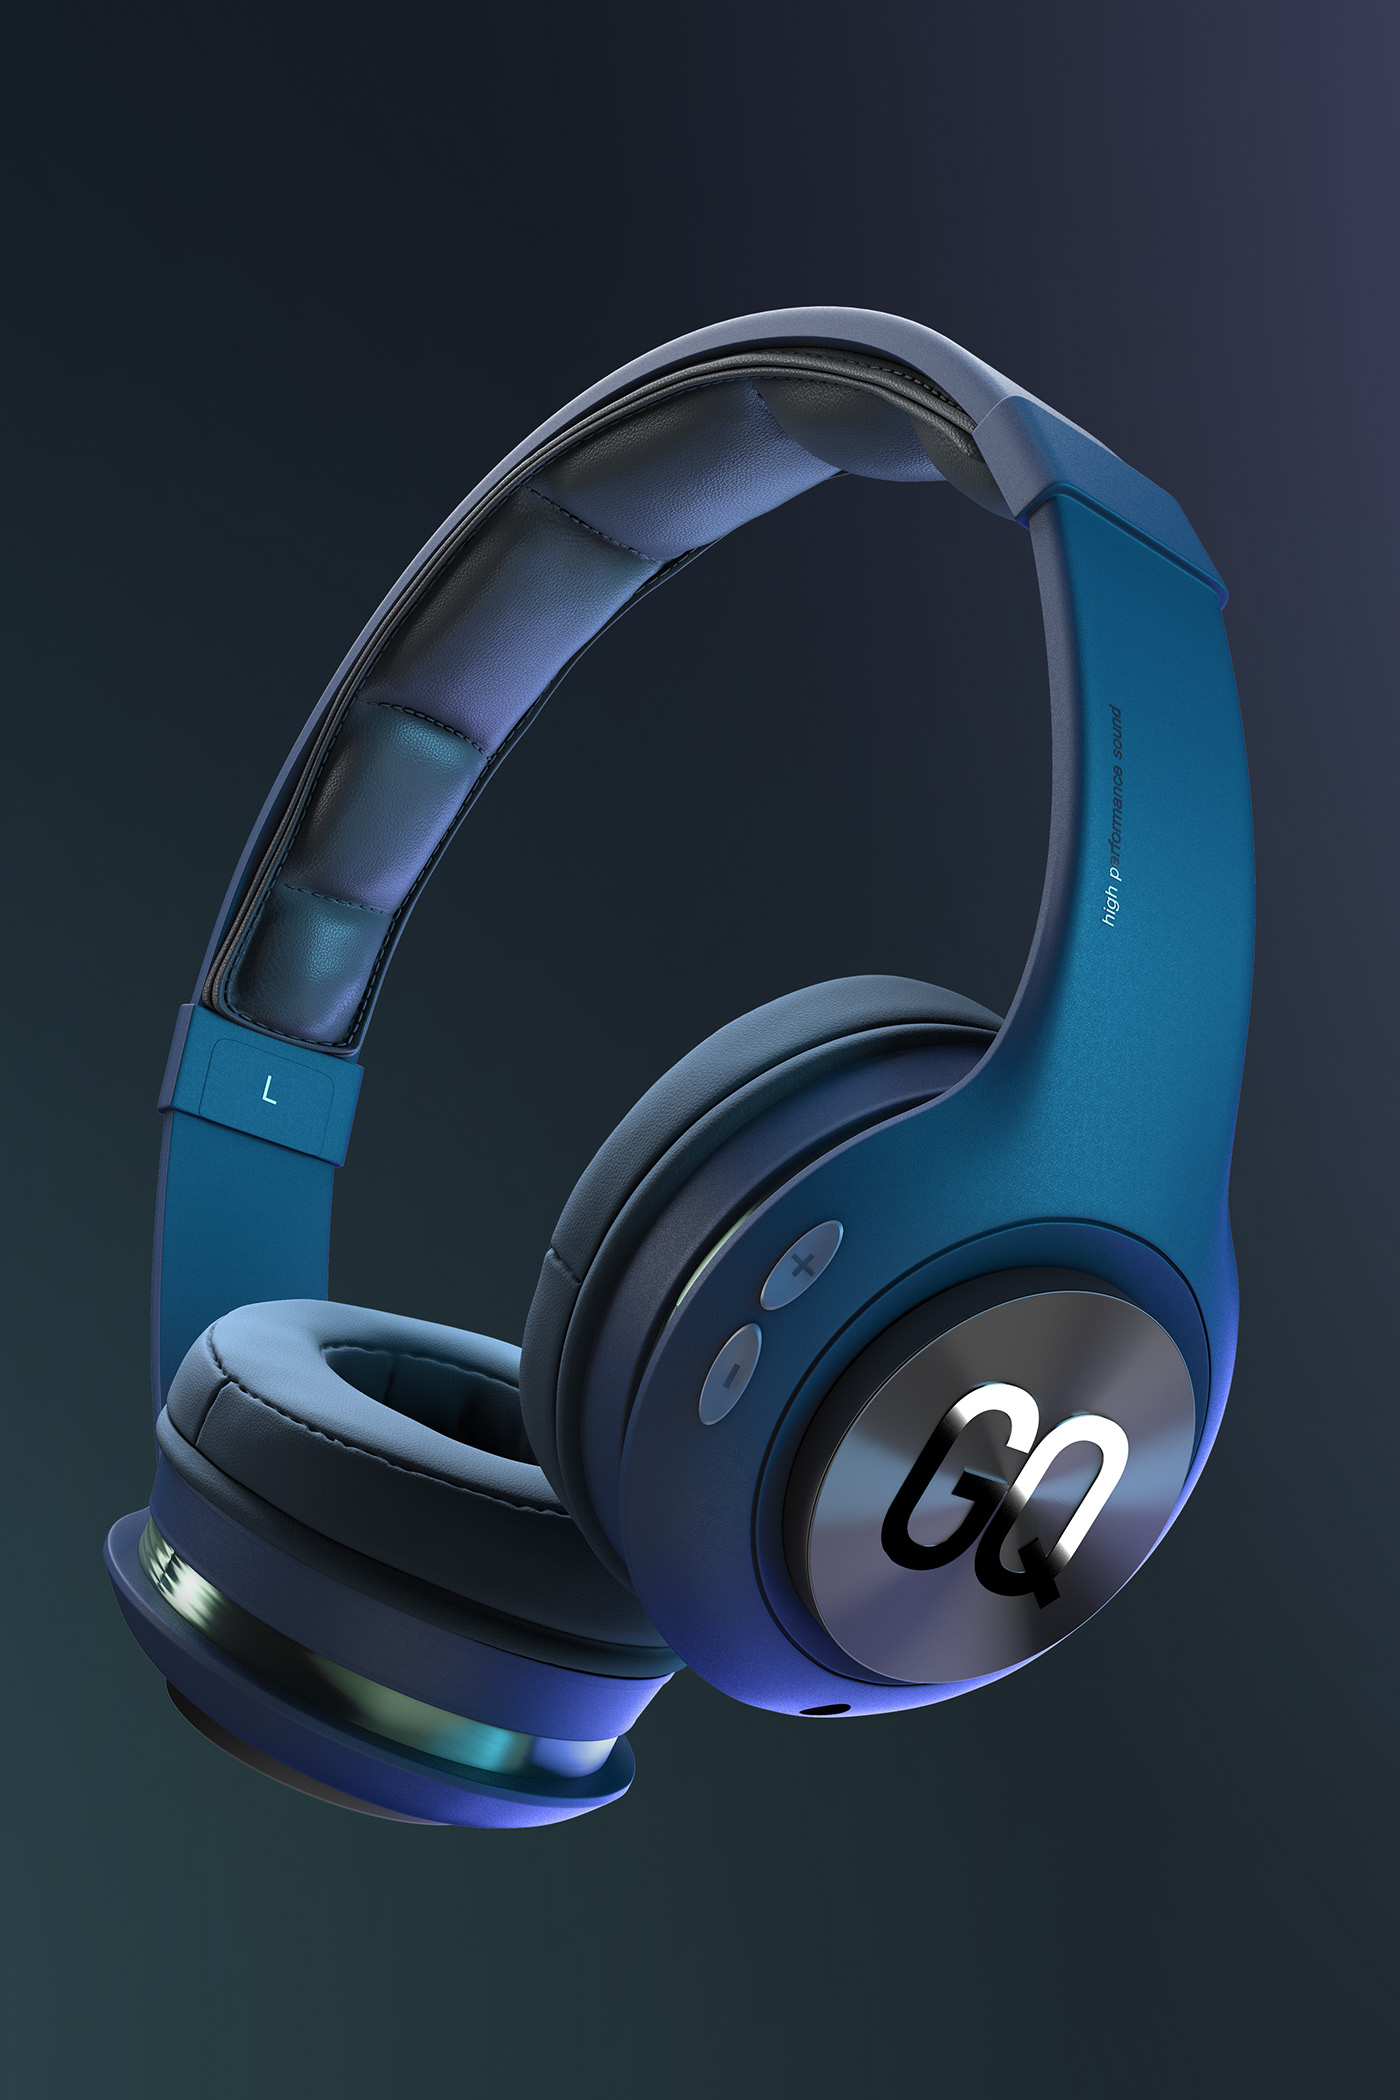 3D 3d modeling 3drendering 3ds max CGI headphones music Product Photography visualization vray